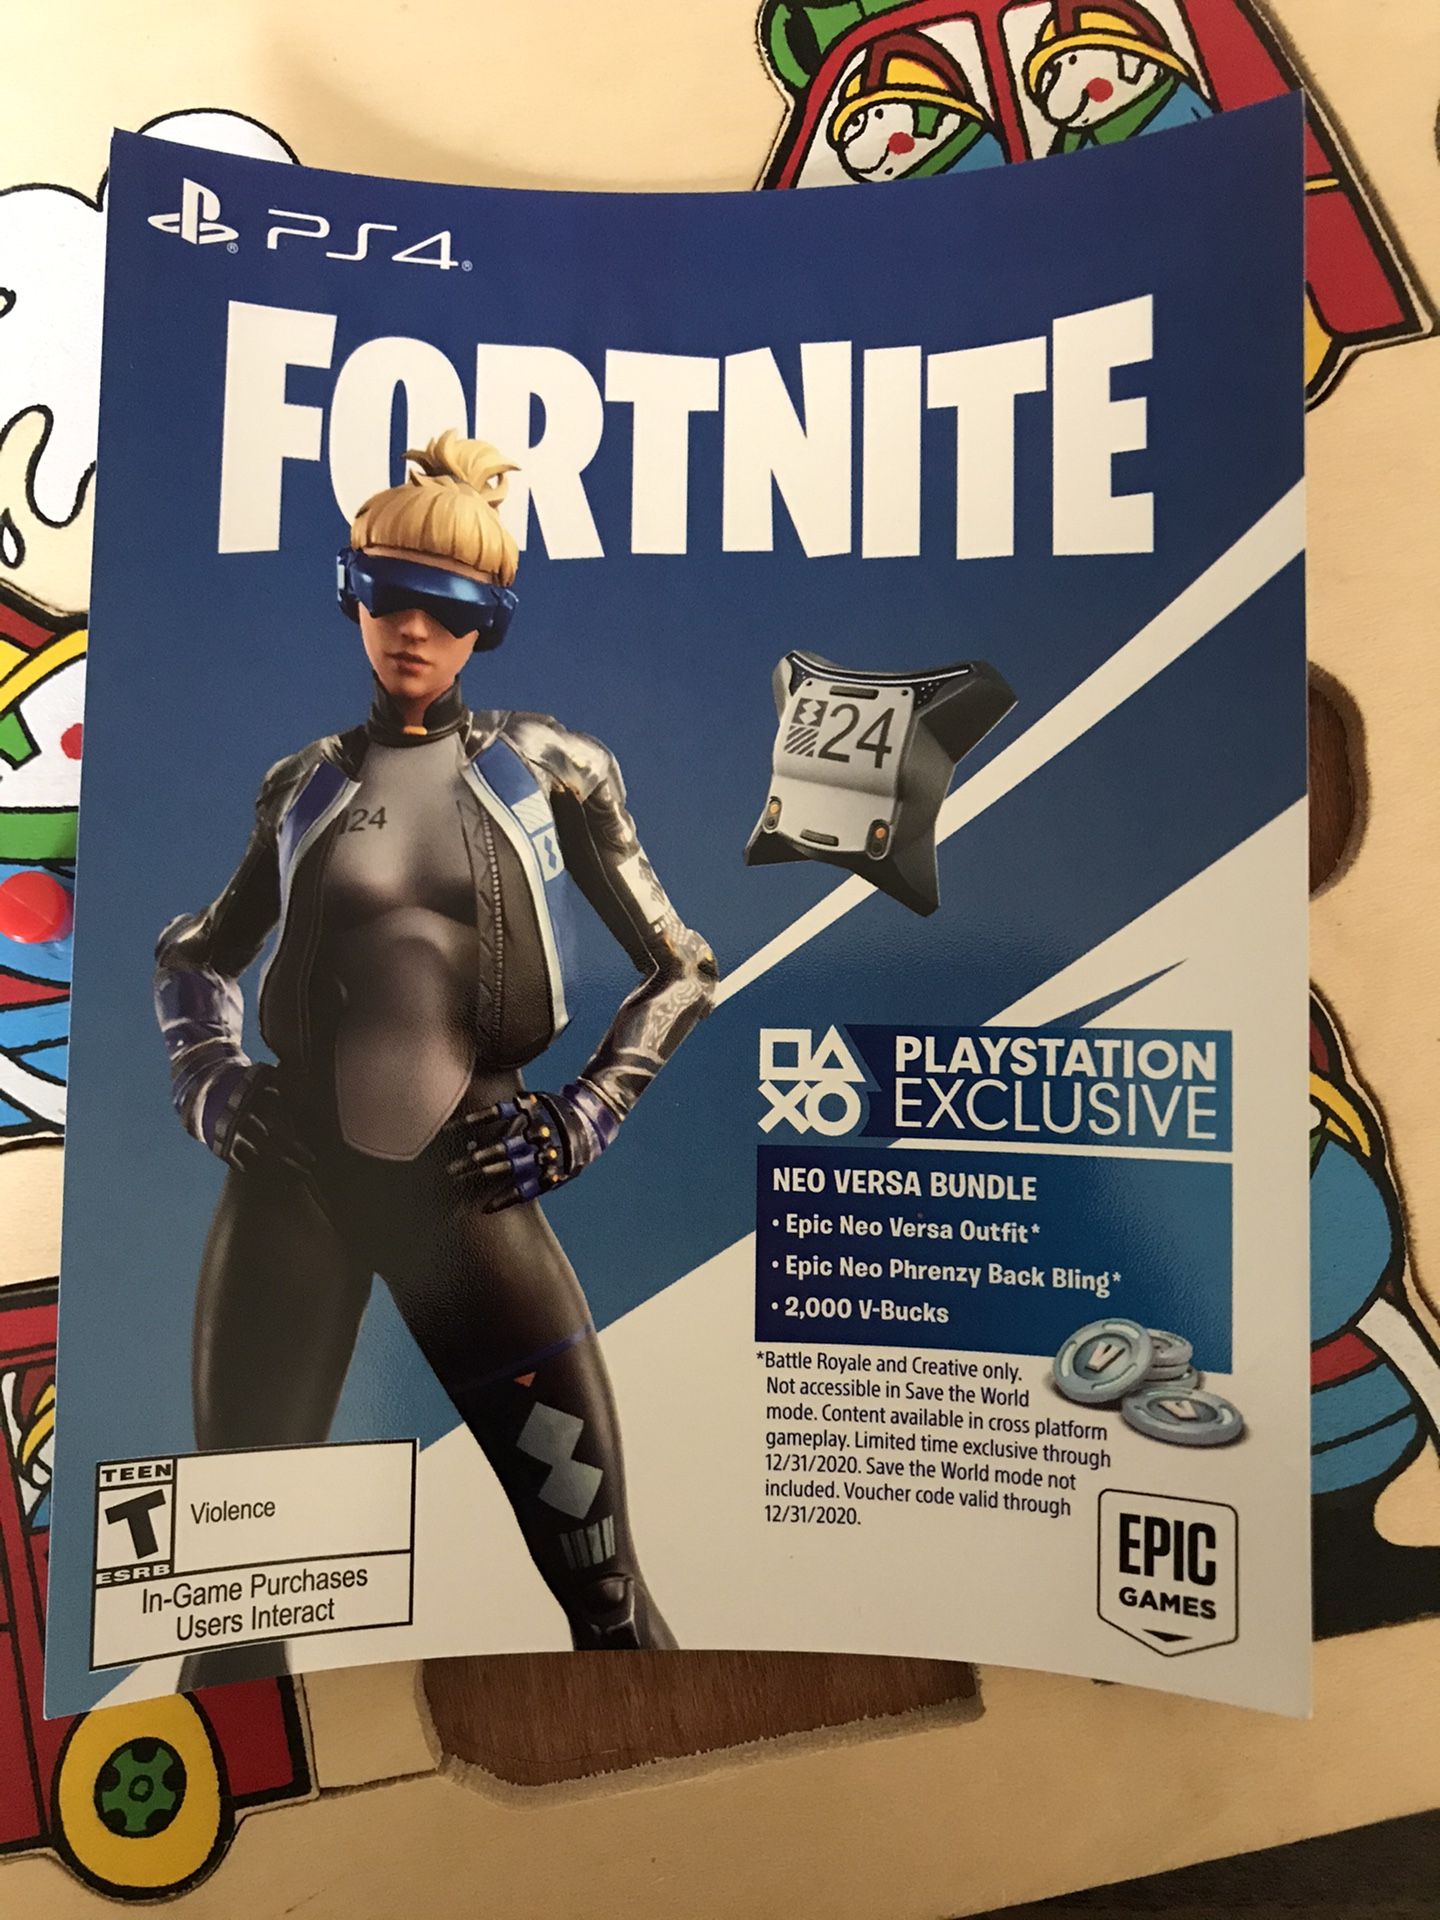 Fortnite DLC bundle neo versa outfit and mint pick axe